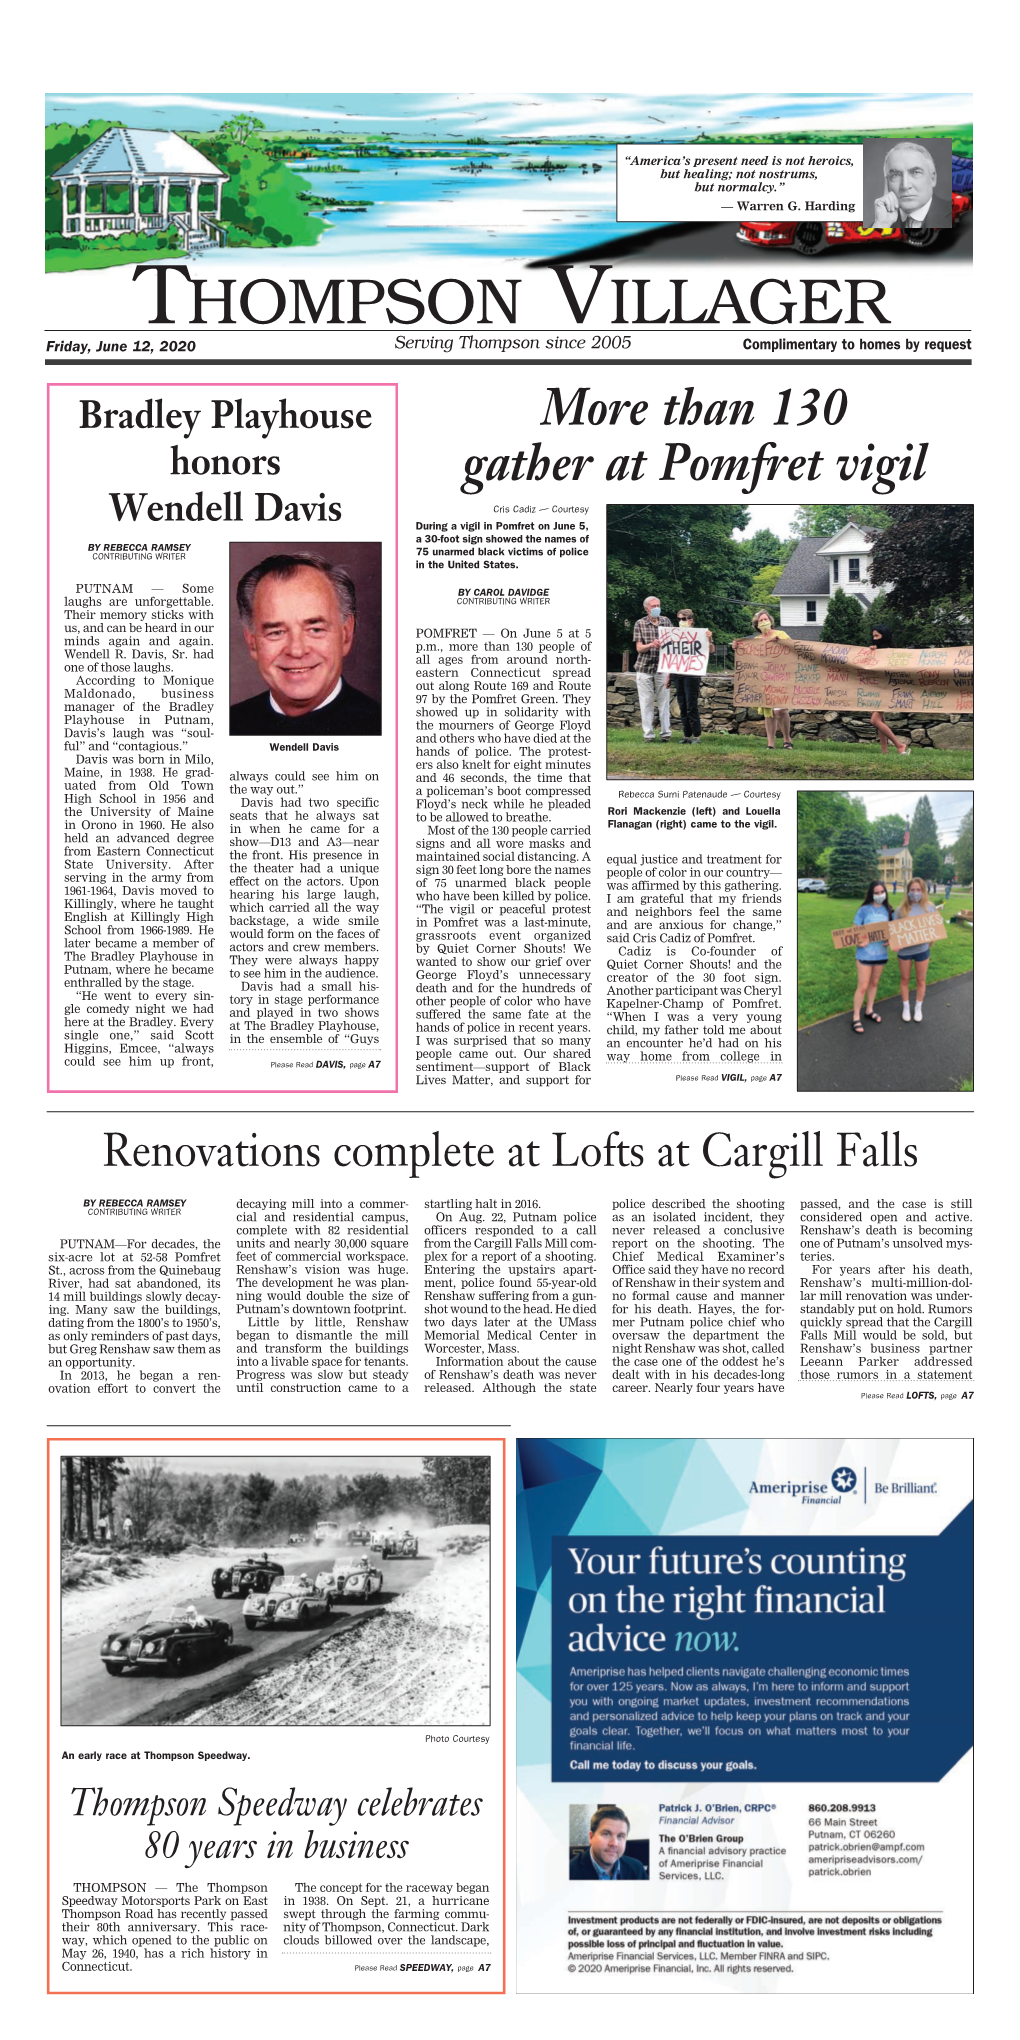 Thompson Villager Friday, June 12, 2020 Serving Thompson Since 2005 Complimentary to Homes by Request